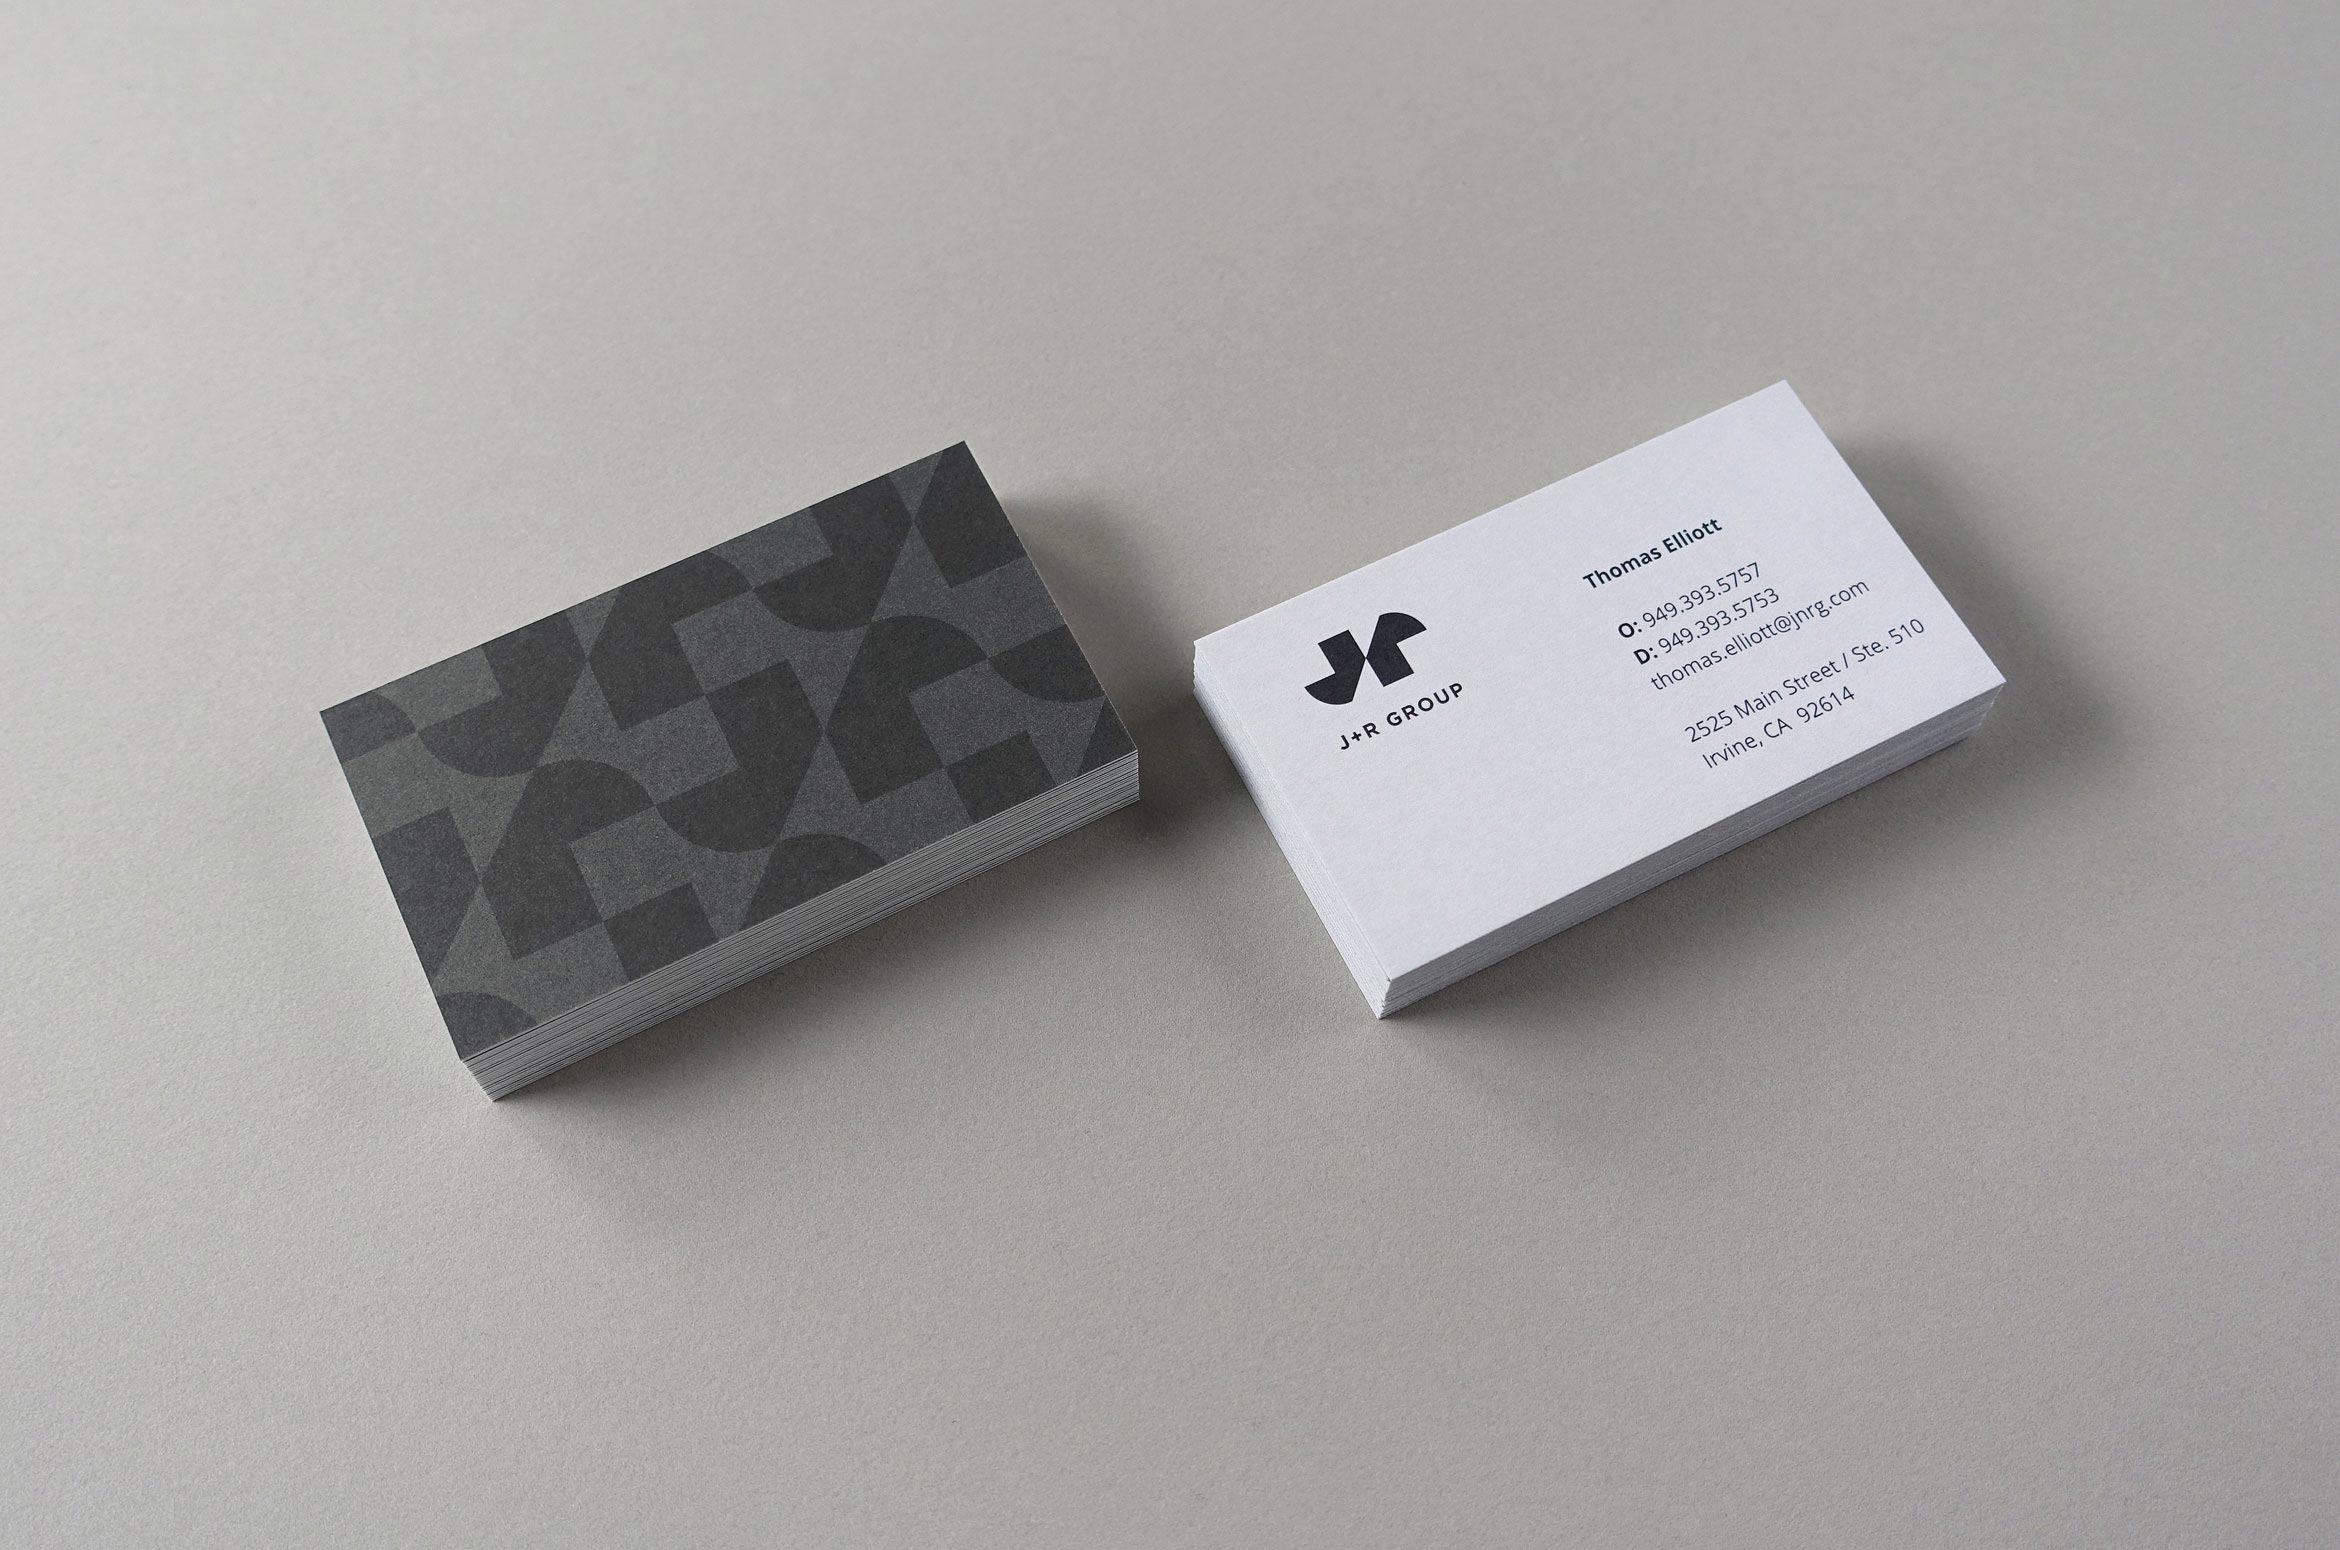 J+R Group business cards front and back